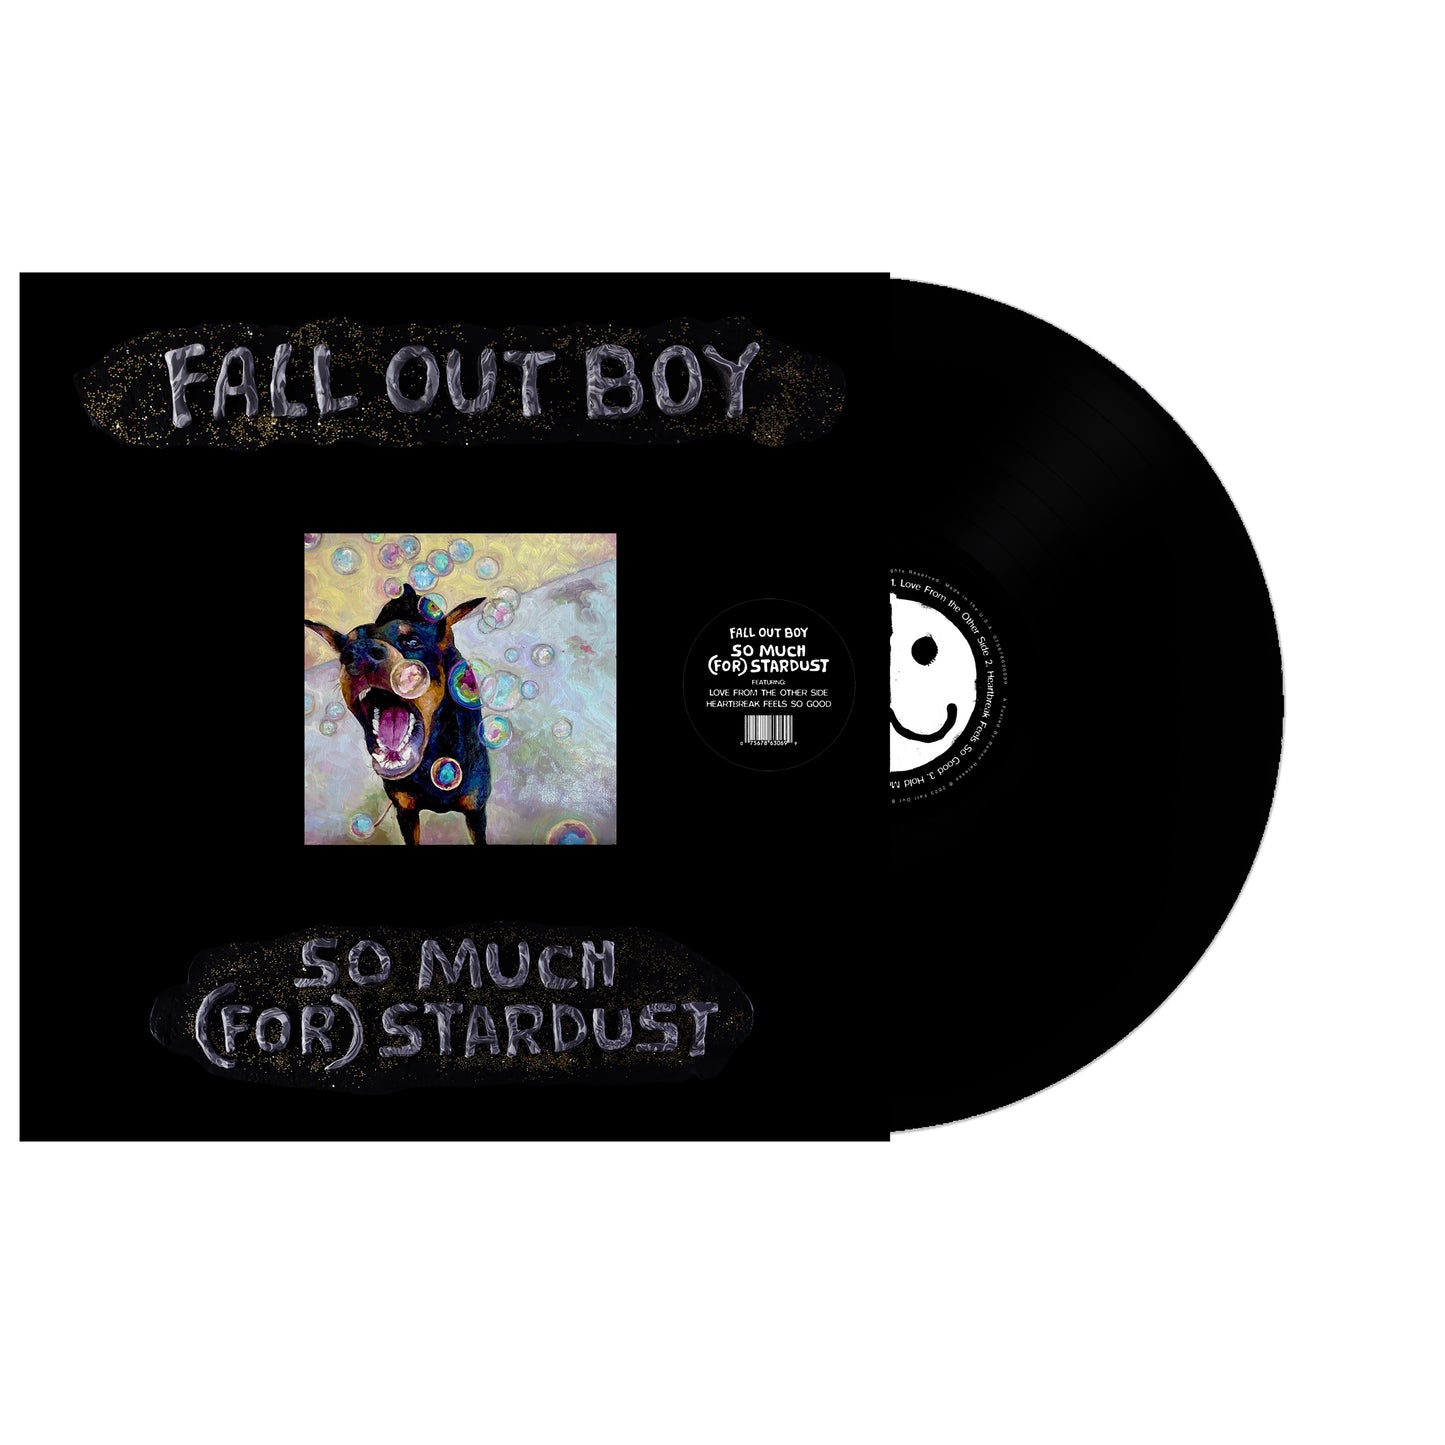 Fall Out Boy "So Much (For) Stardust" LP